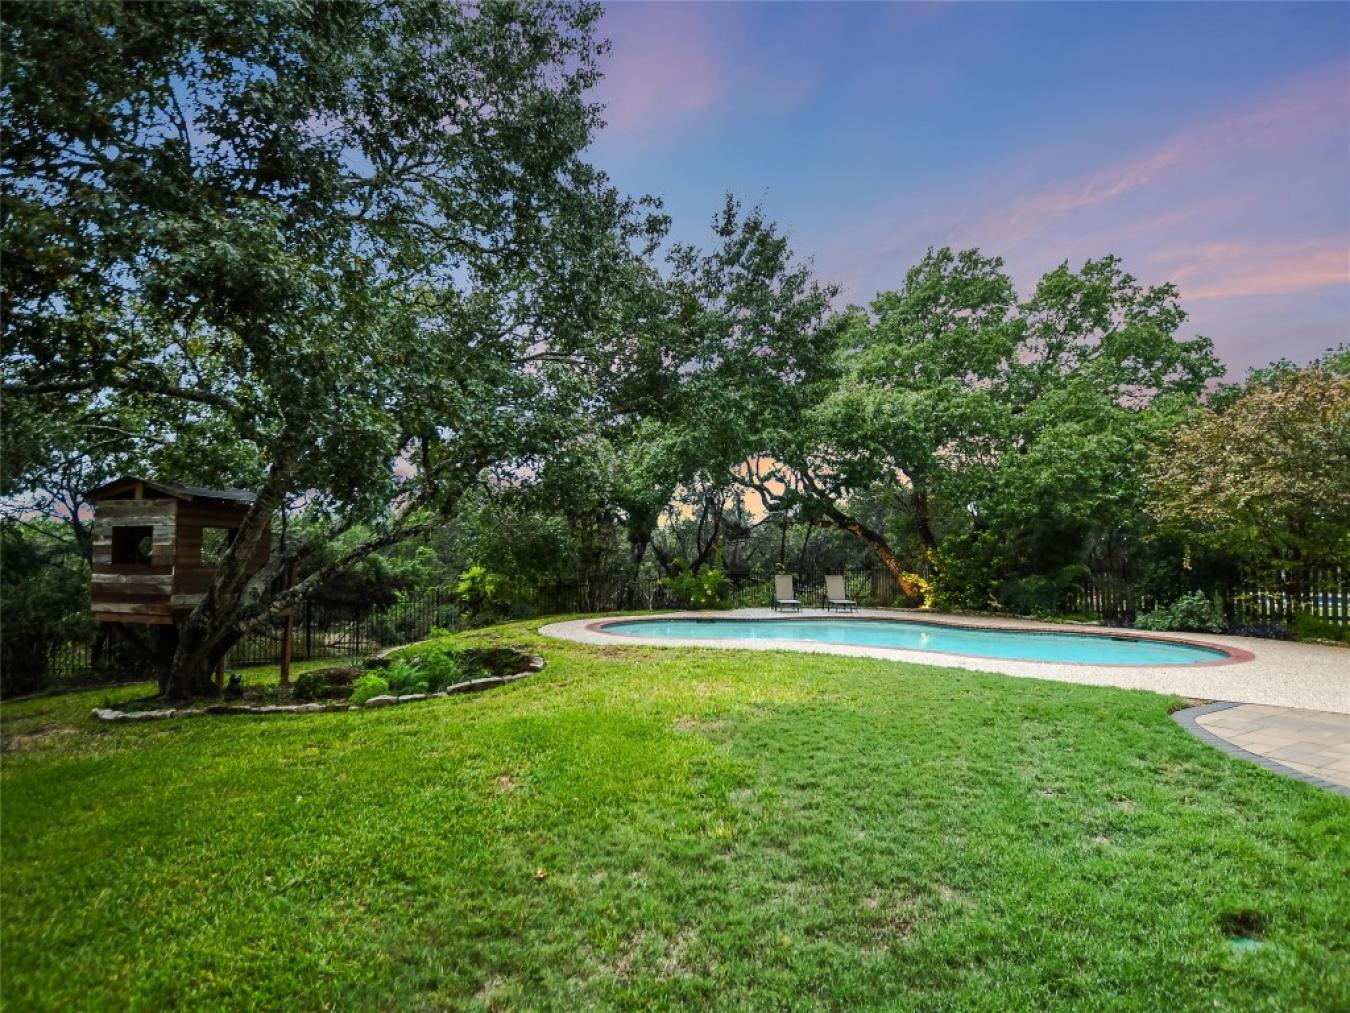 9262 Scenic Bluff Drive, Austin, Texas, 78733, United States, 4 Bedrooms Bedrooms, ,3 BathroomsBathrooms,Residential,For Sale,9262 Scenic Bluff Drive,1390303